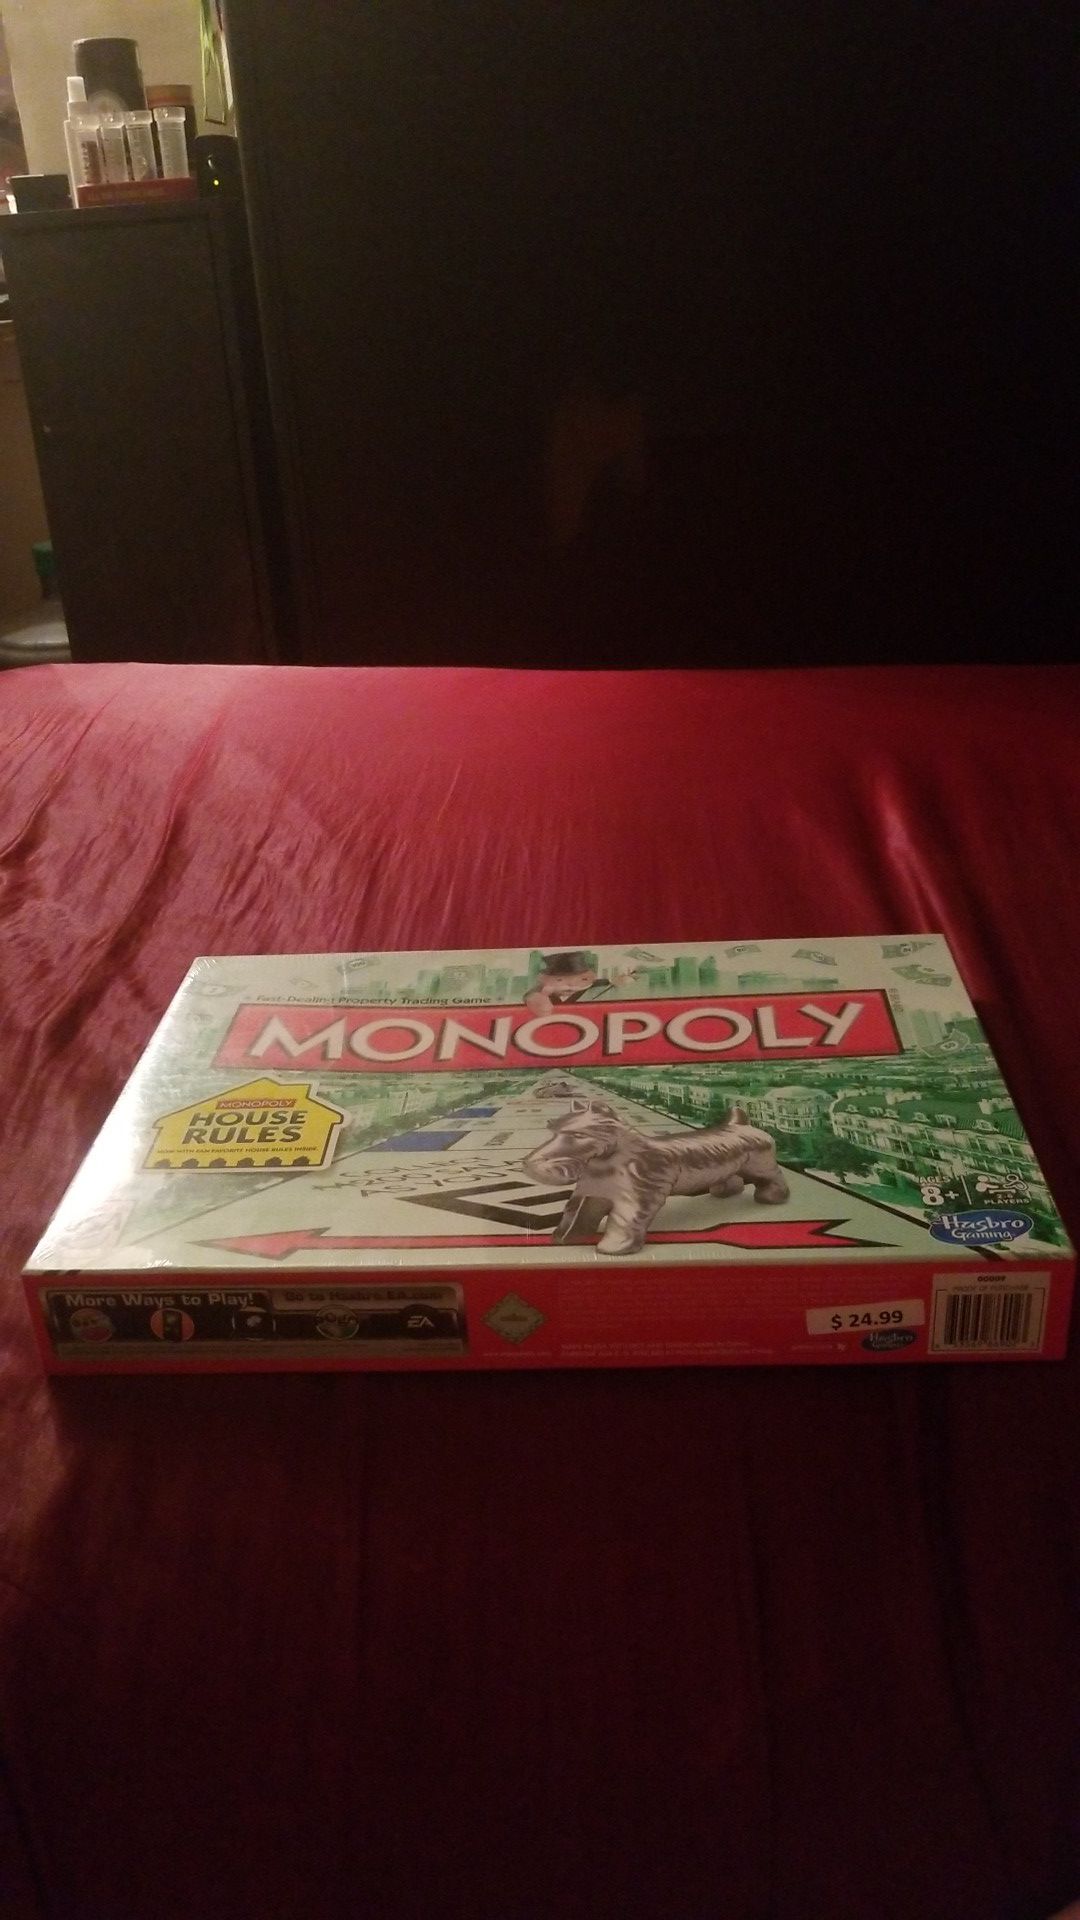 KID'S MONOPOLY HOUSE RULES HASBRO GAME!!!!!